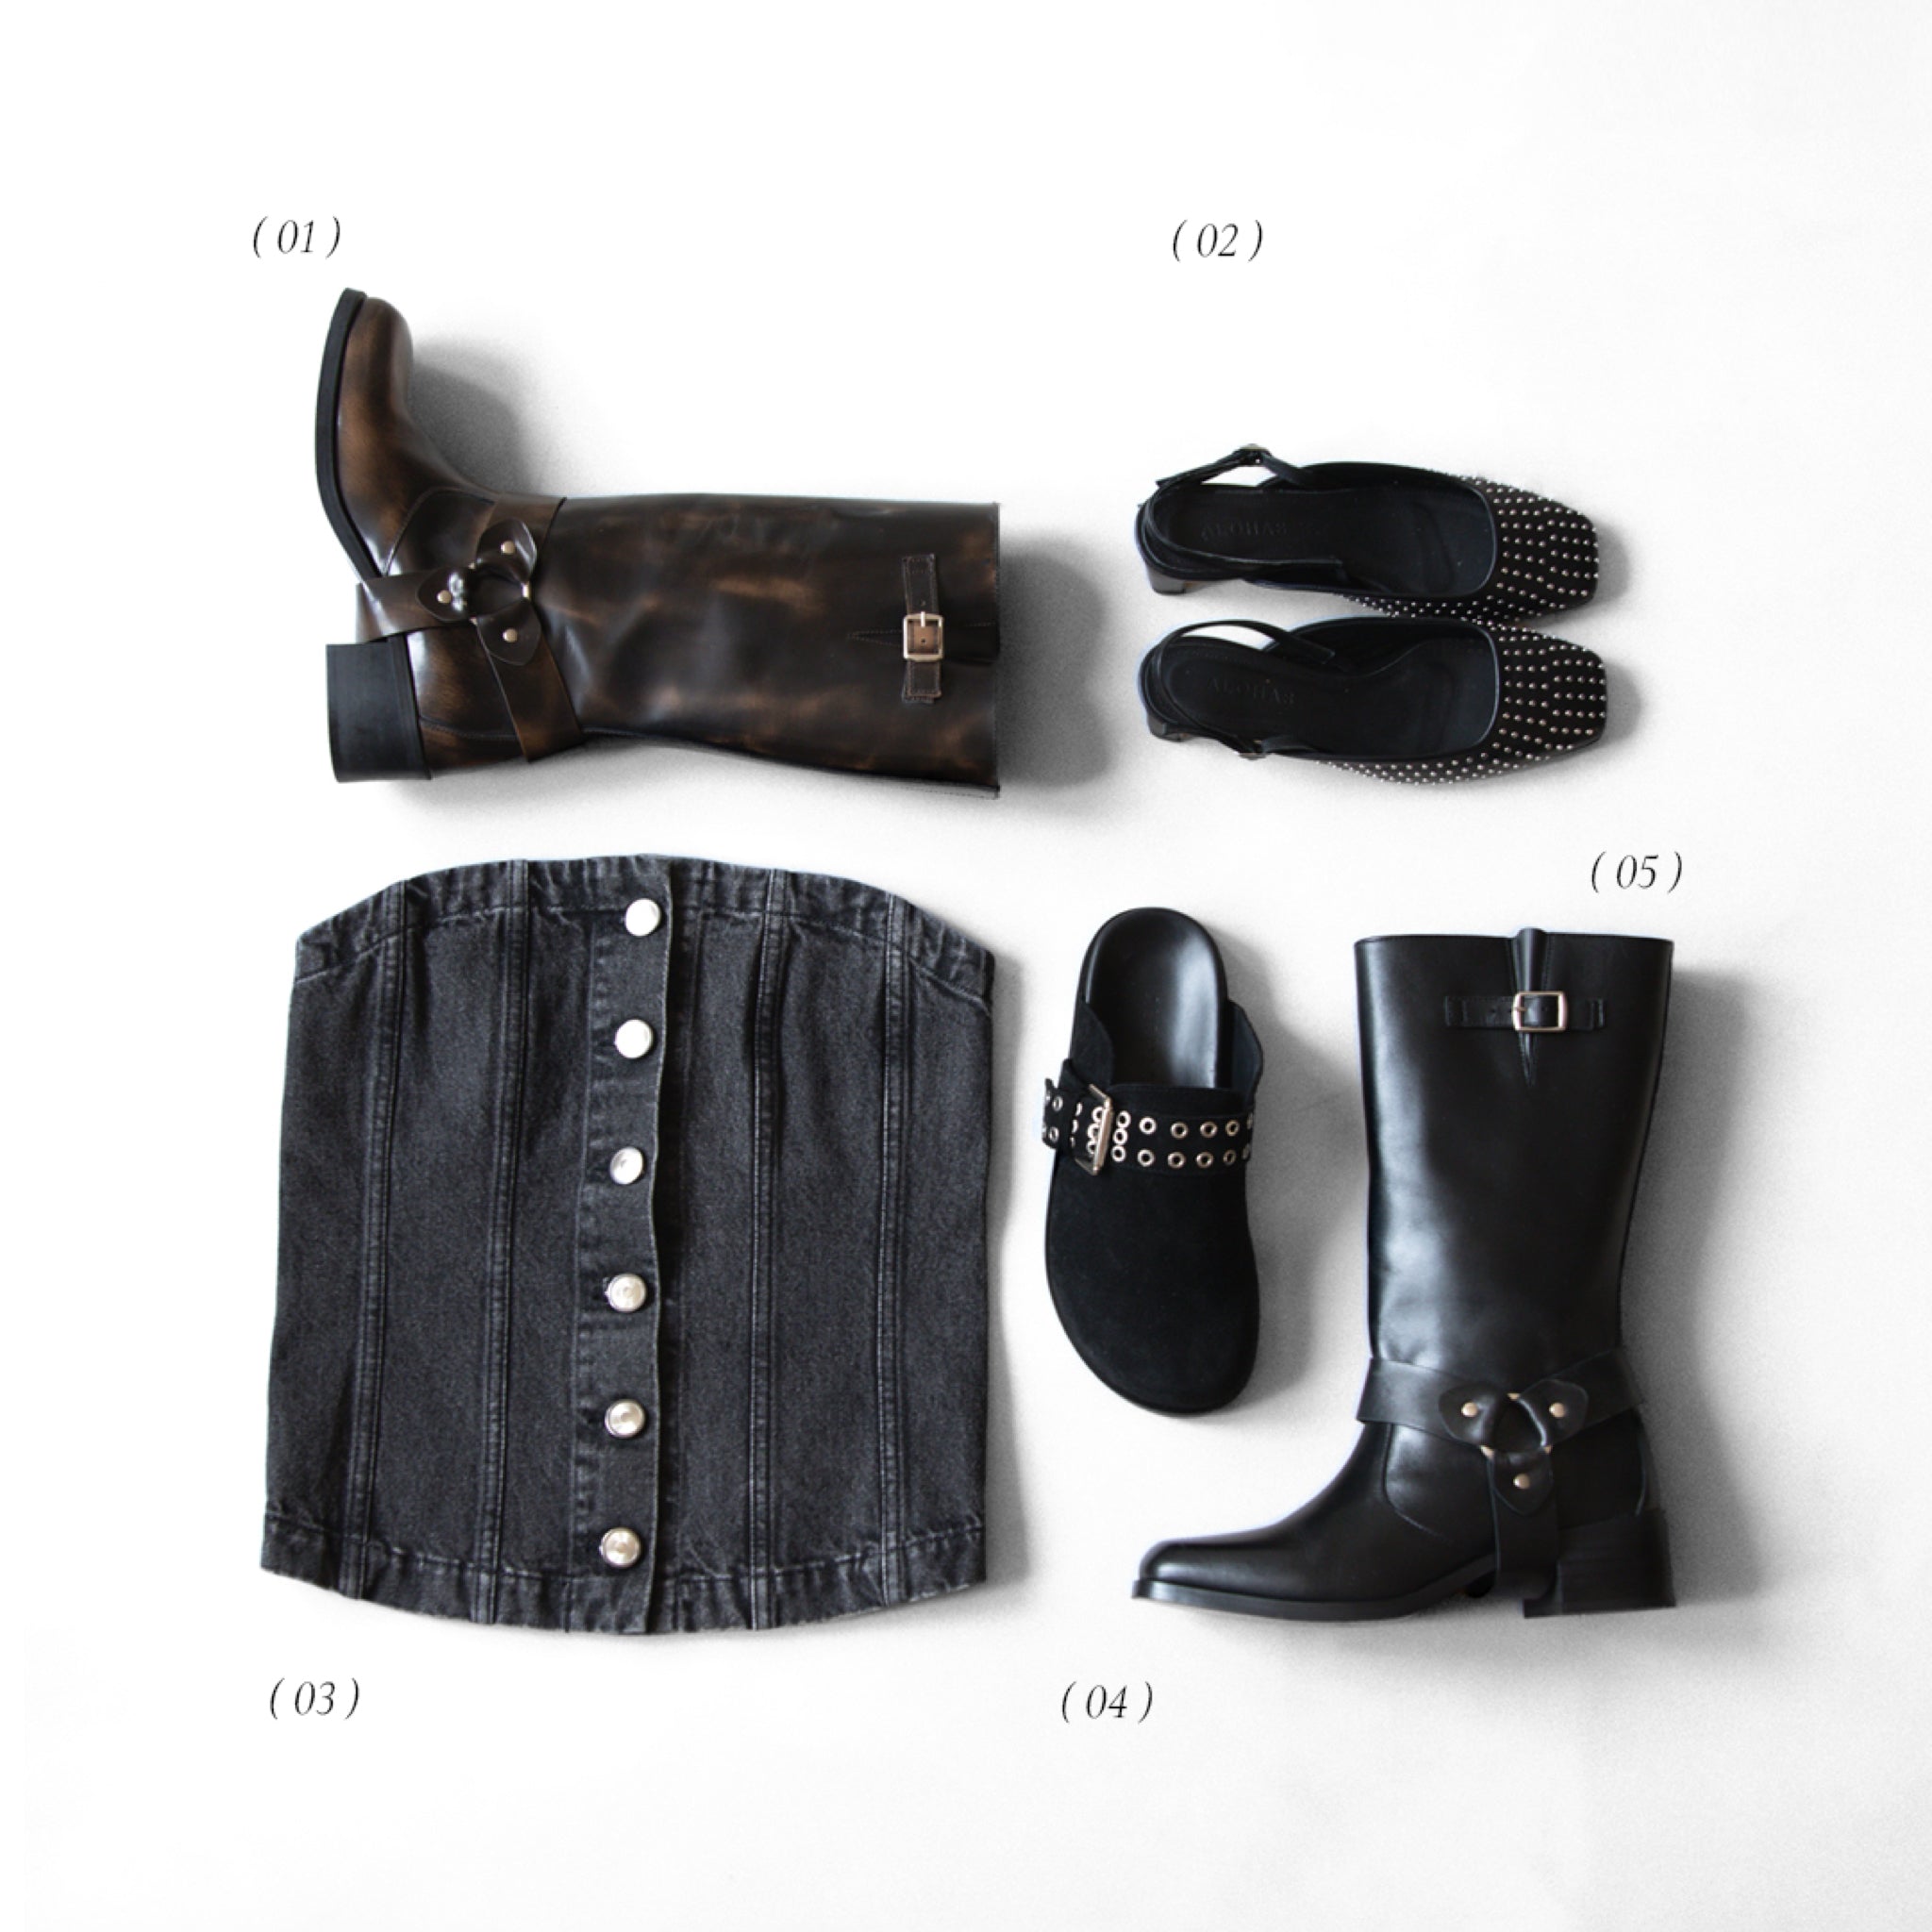 Biker boots outfits